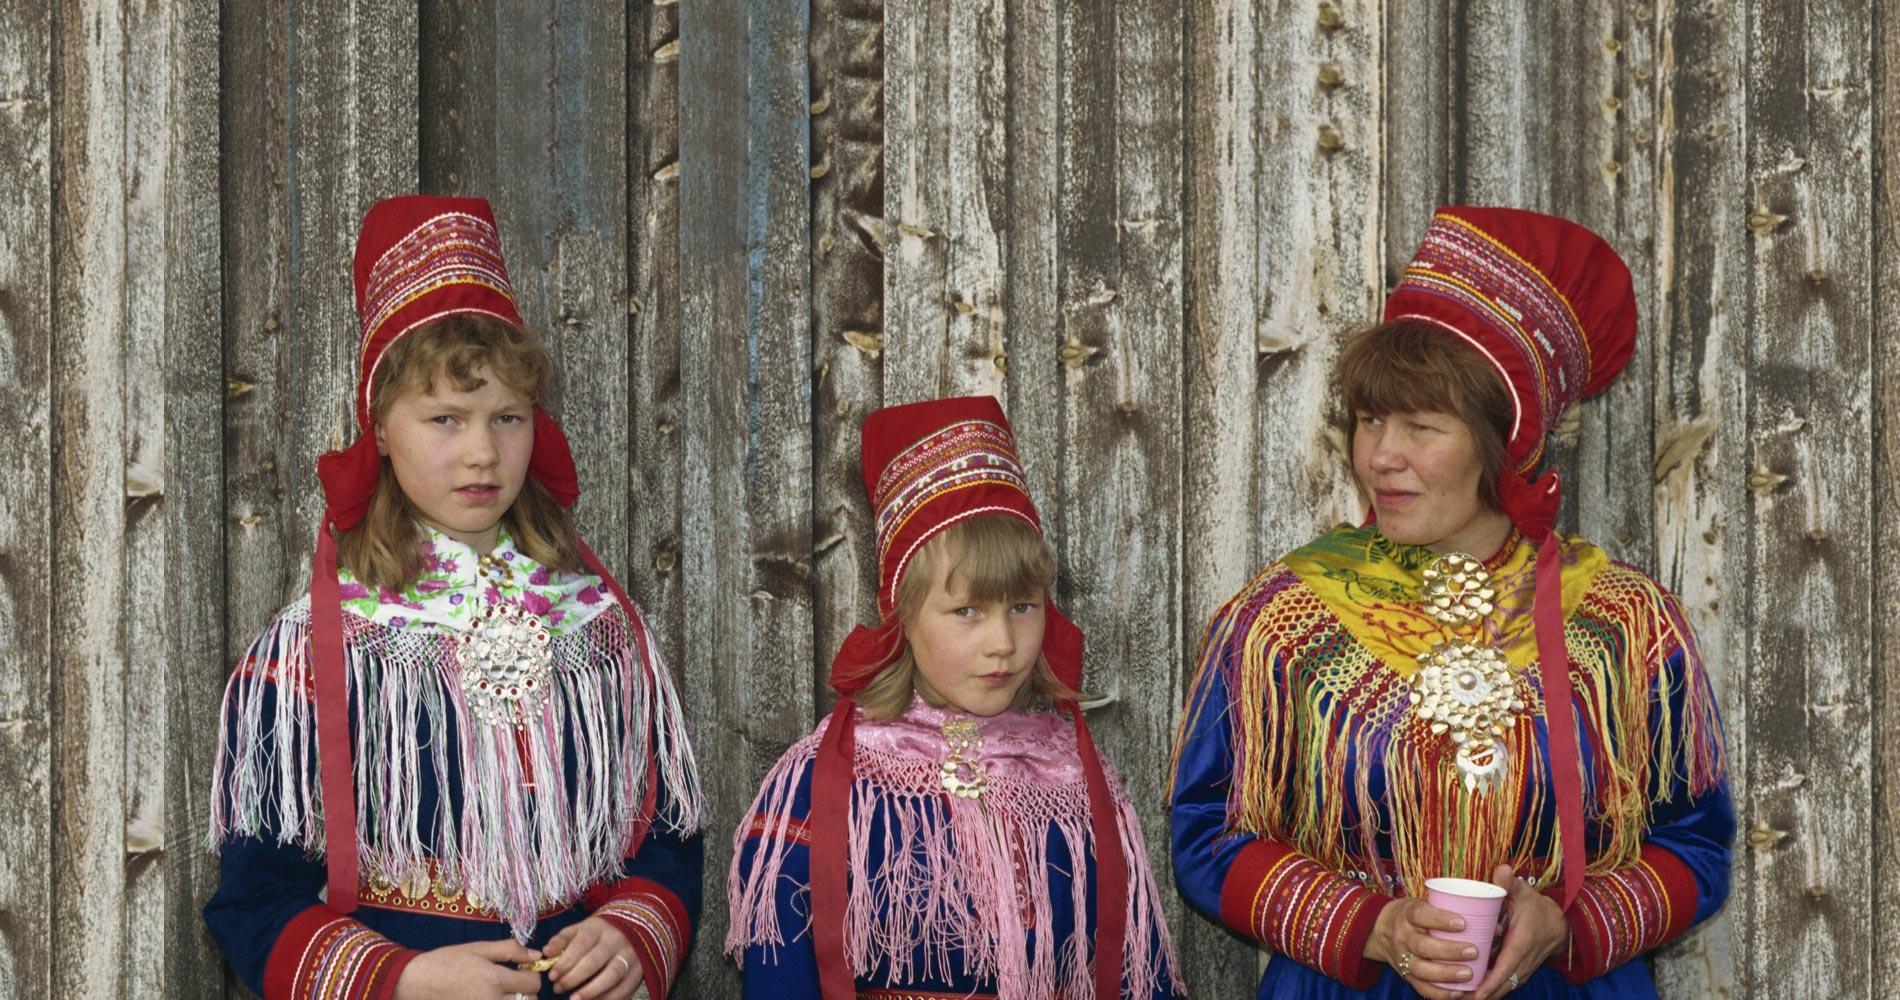 The Sámi in Finland: An Ongoing Human Rights Controversy